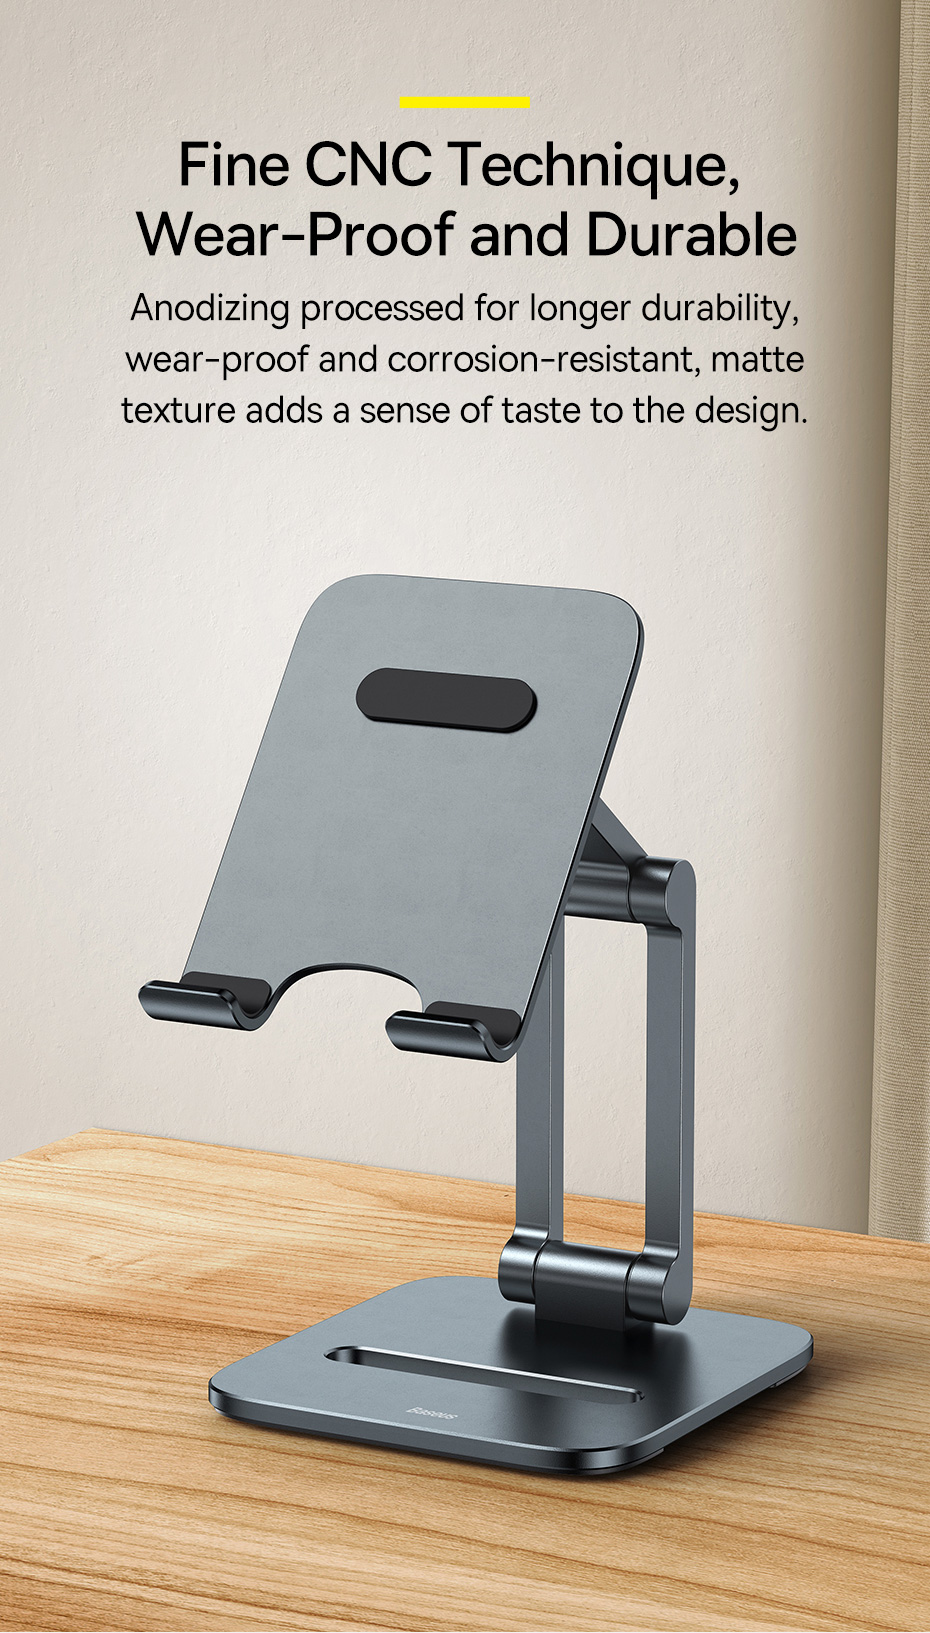 Baseus-Phone-Holder-Desk-Double-Axis-Foldable-Metal-Stand-for-iPad-Pro-Air-Tablet-1975775-12